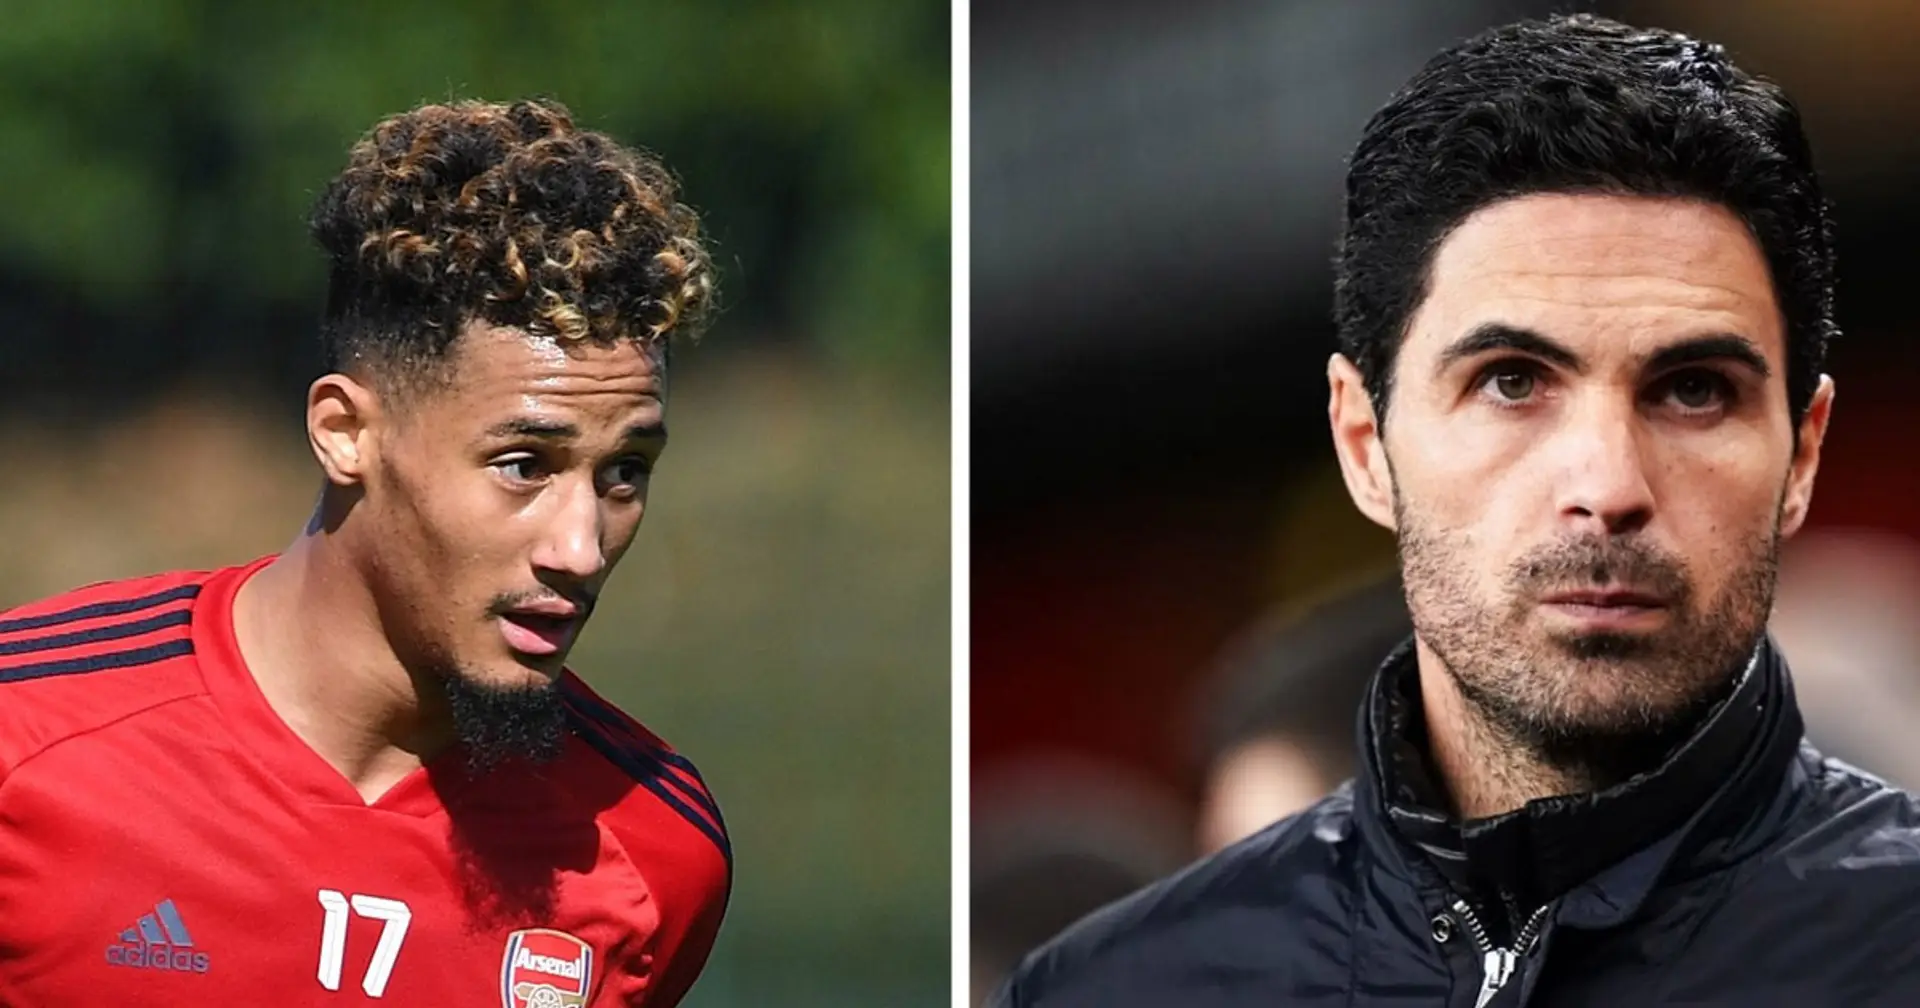 Will Saliba play for Arsenal this season? 4 facts, 3 suggestions